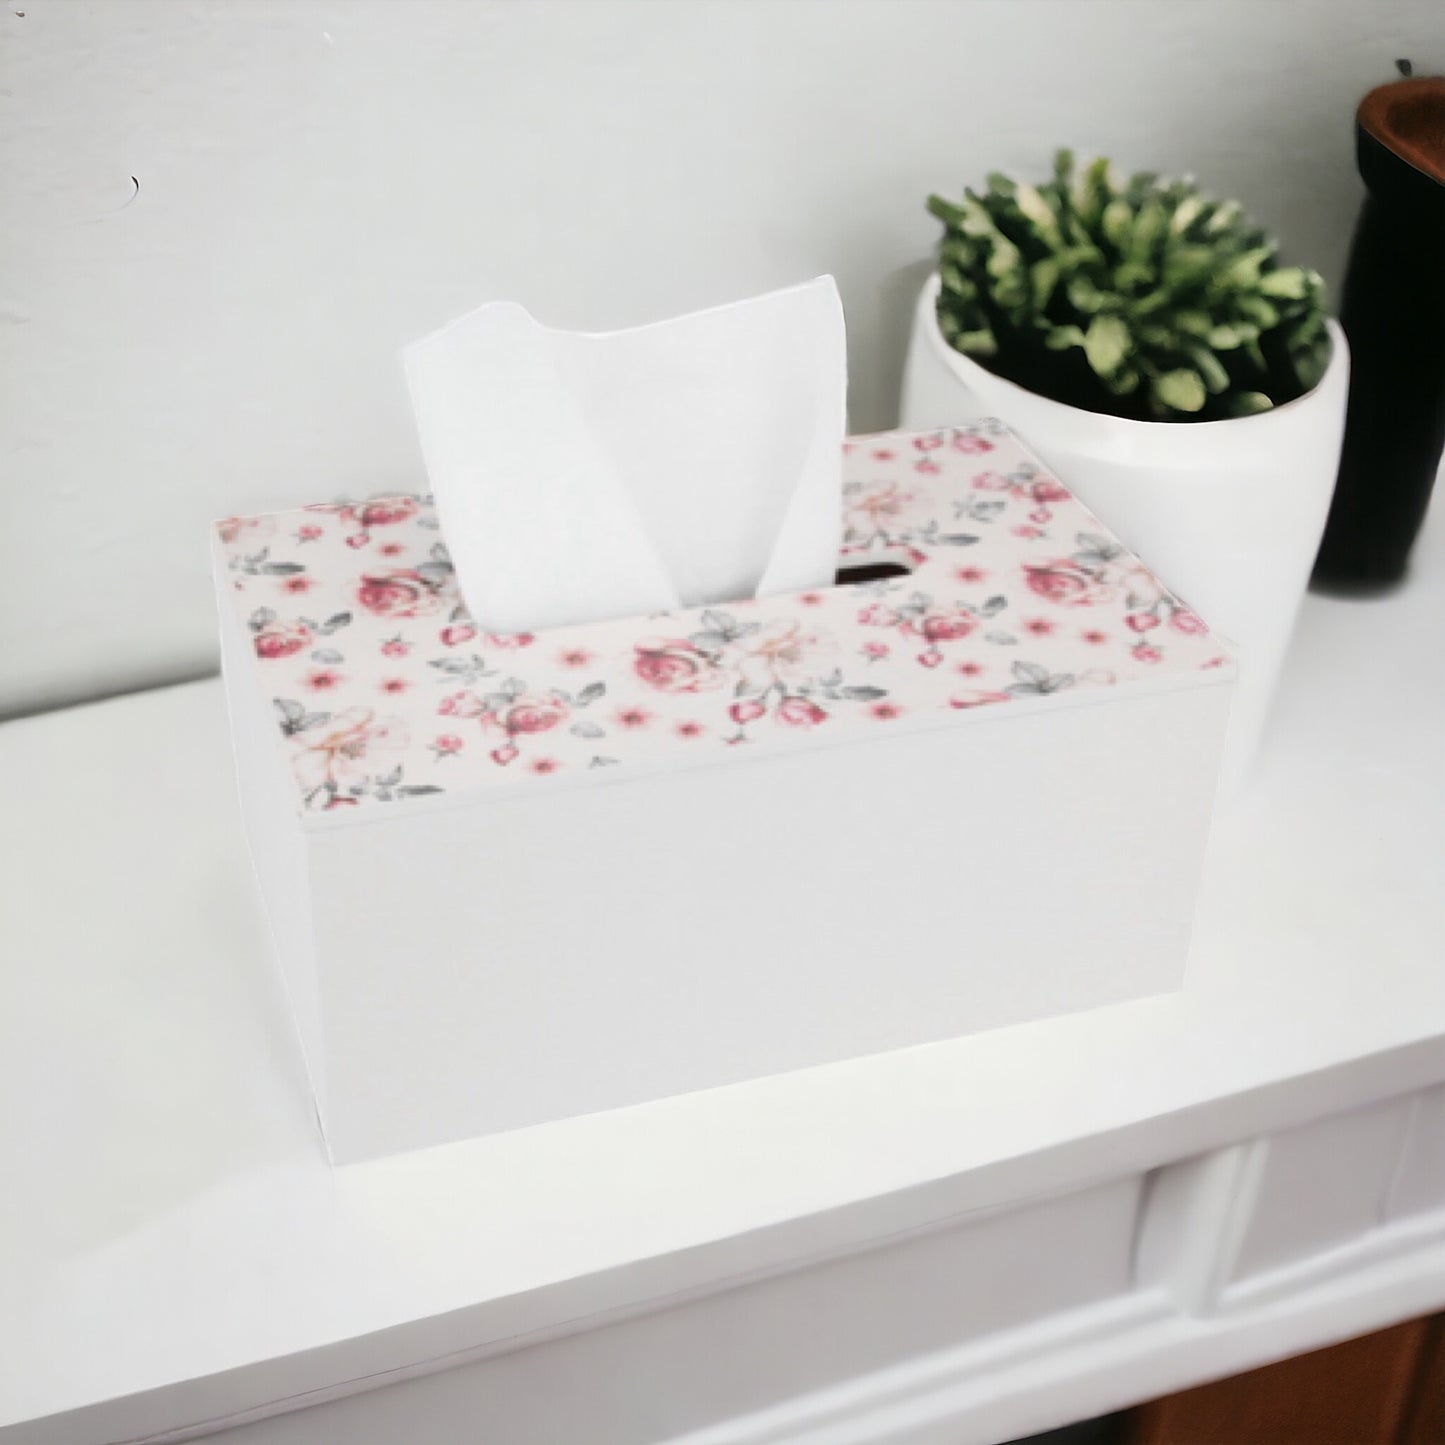 Tissue Box Country Vintage Rose Floral - The Renmy Store Homewares & Gifts 